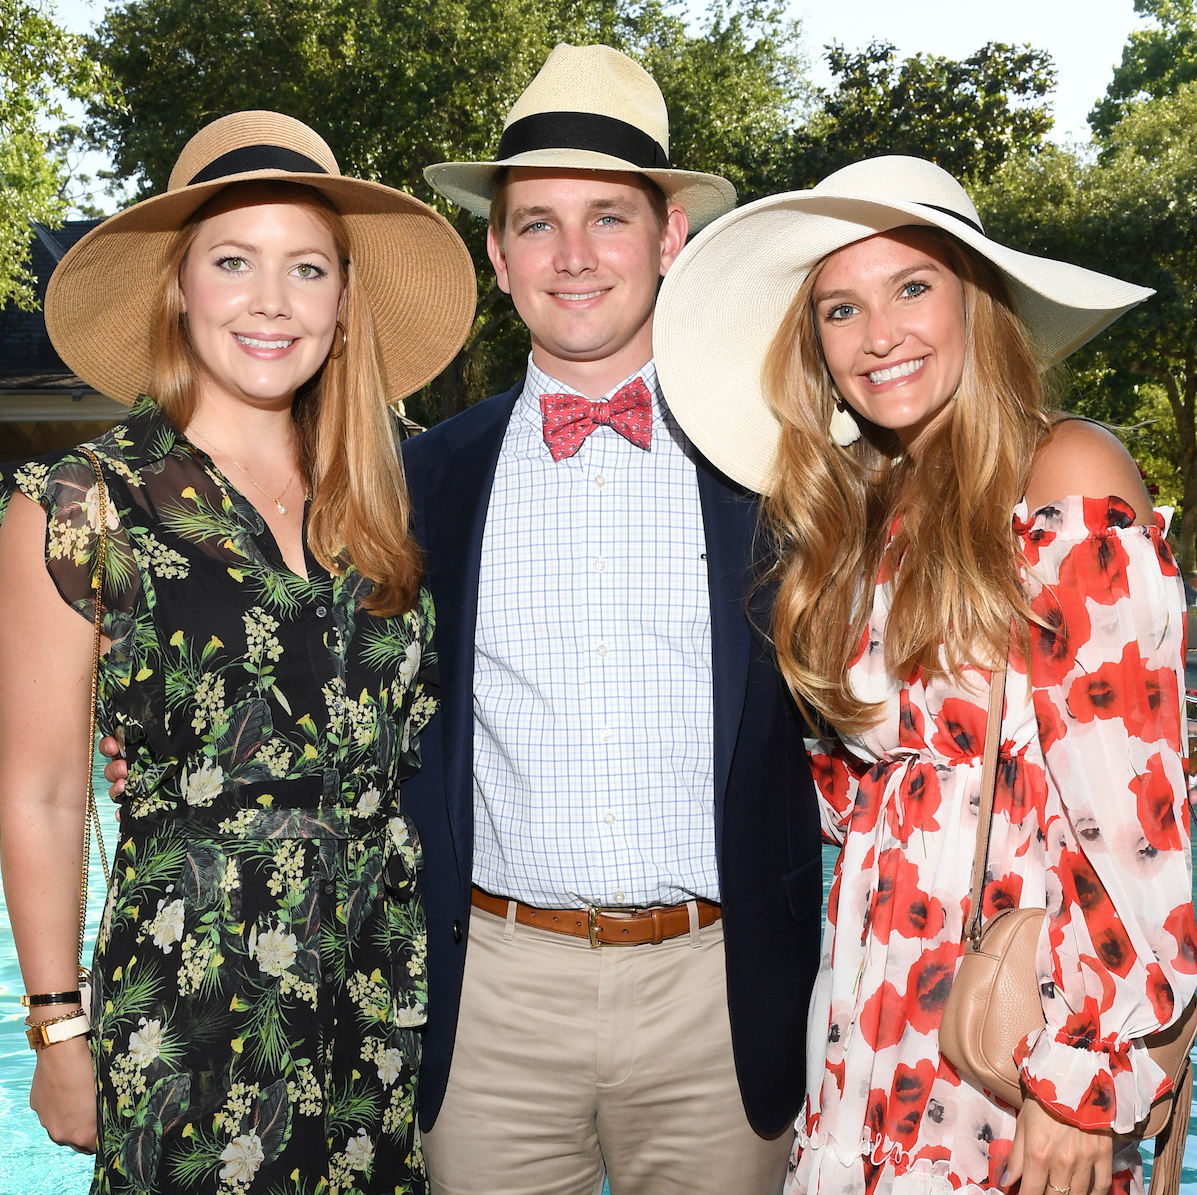 Guests cheer on Derby winner at Hats, Hearts and Horseshoes party ...